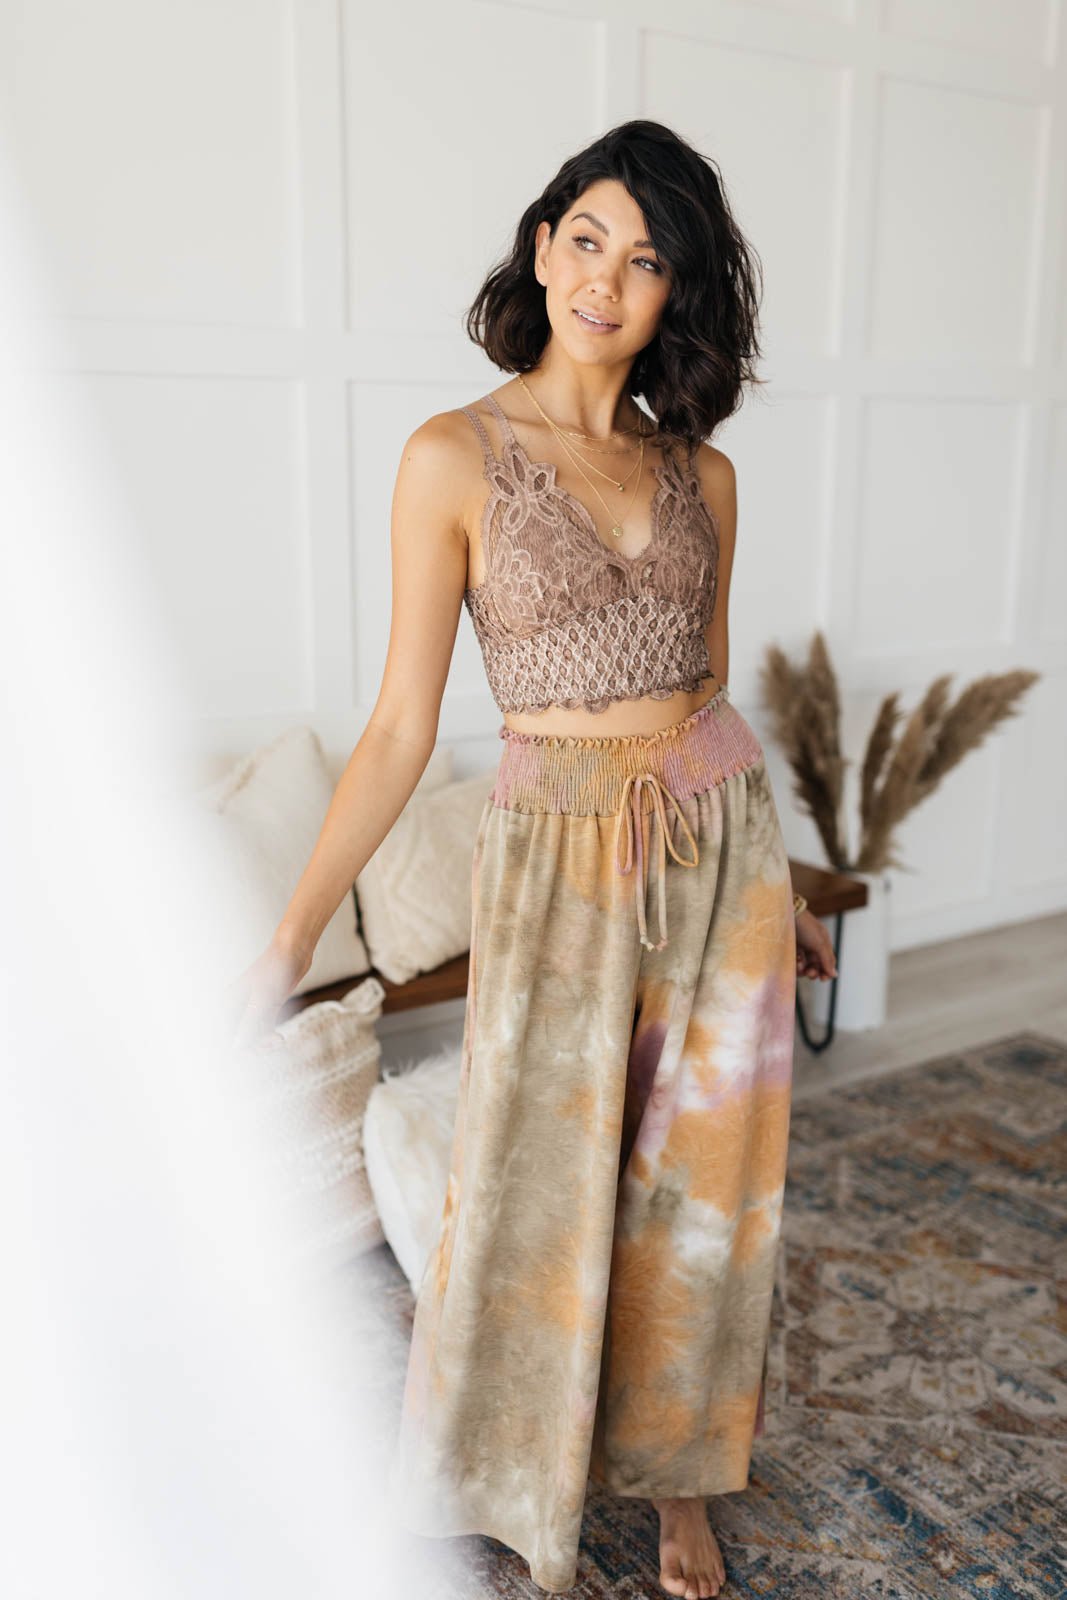 Live In Lace Bralette in Mauve - 4 Ever Trending